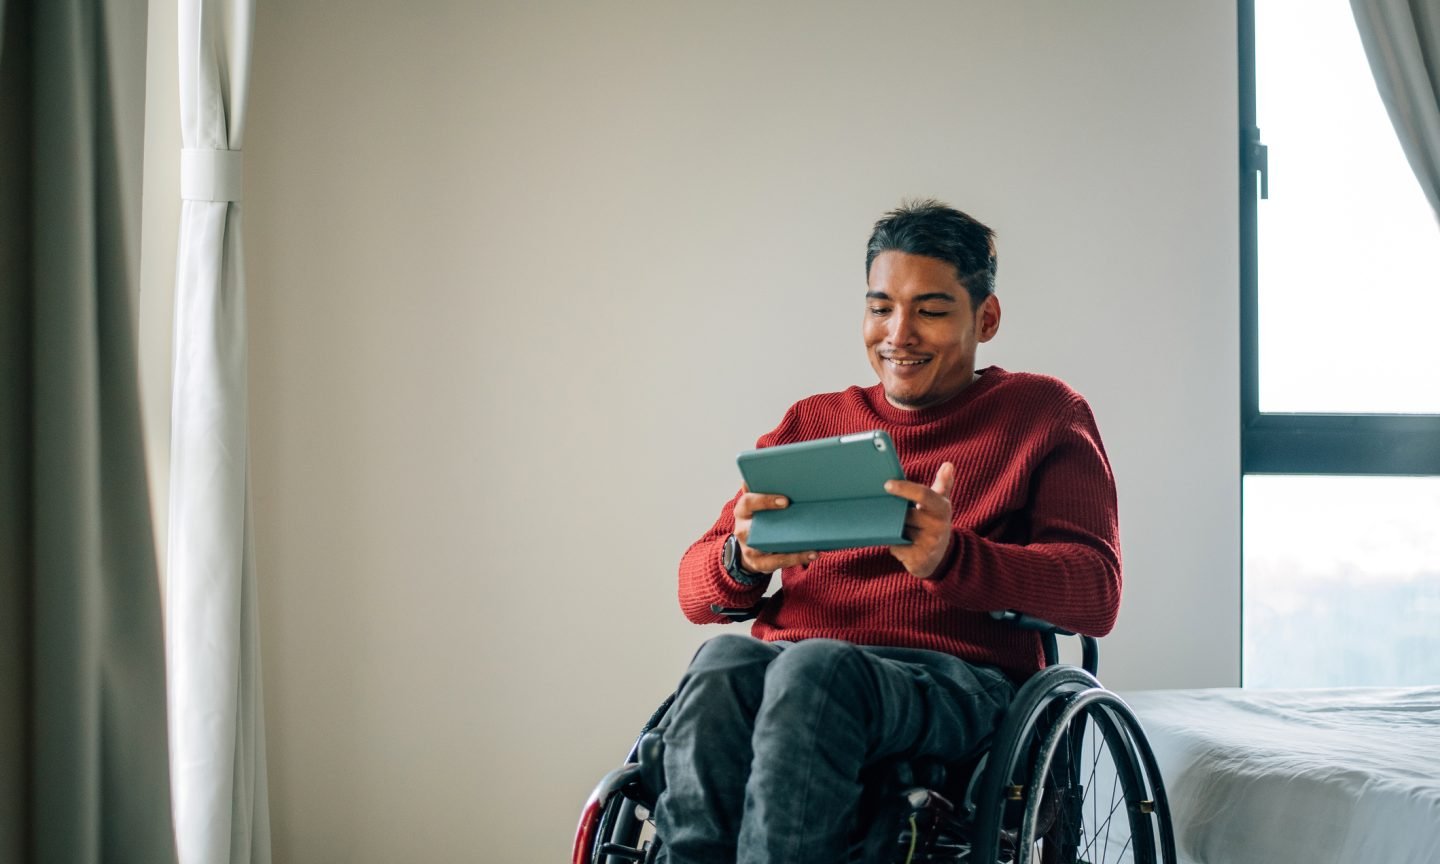 What Different Advantages Can I Get With SSDI? – NerdWallet